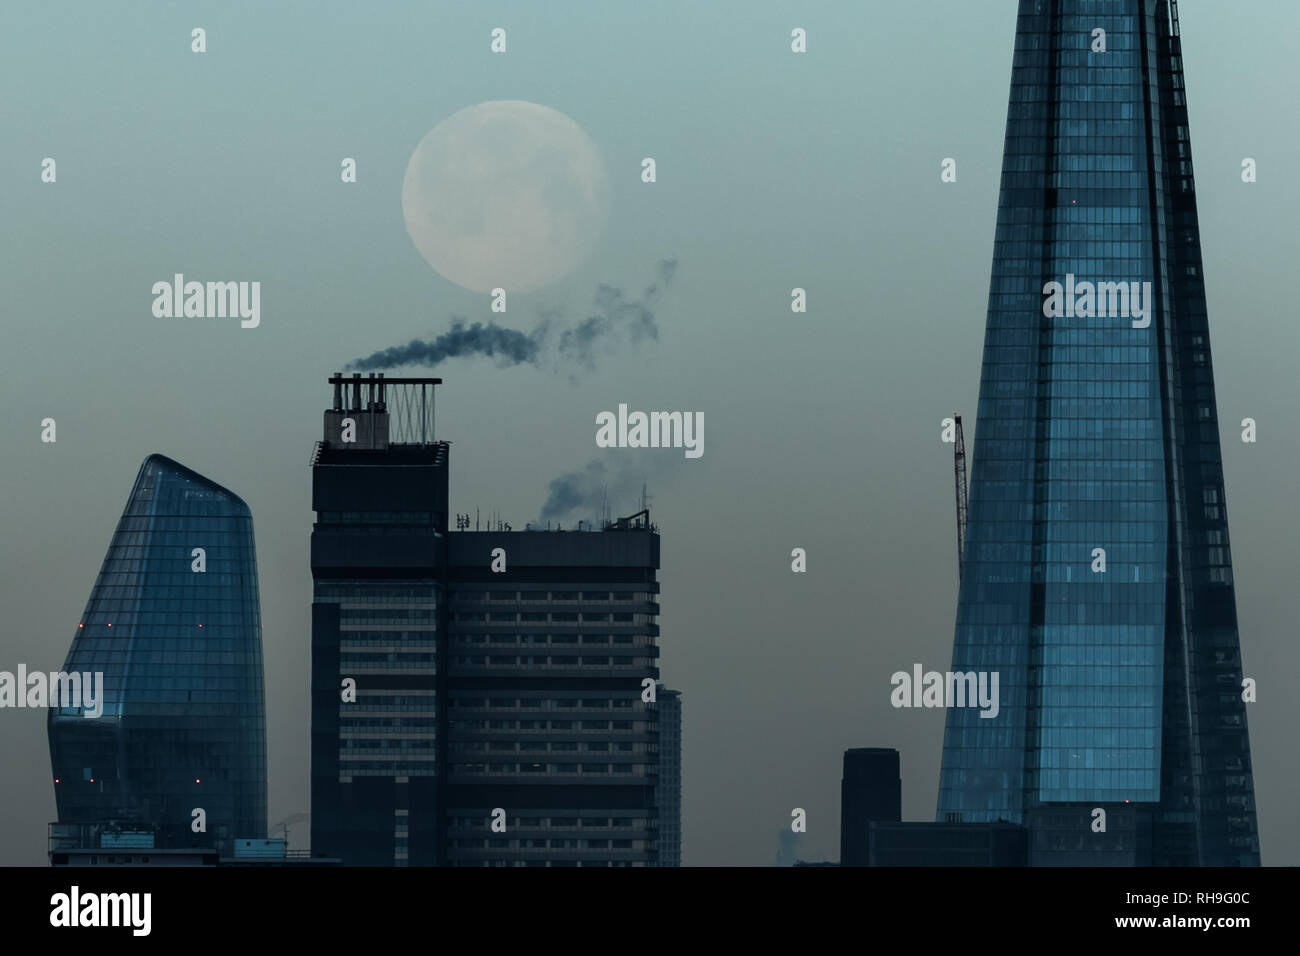 UK Weather: The morning moon sets near the Shard skyscraper building Stock Photo